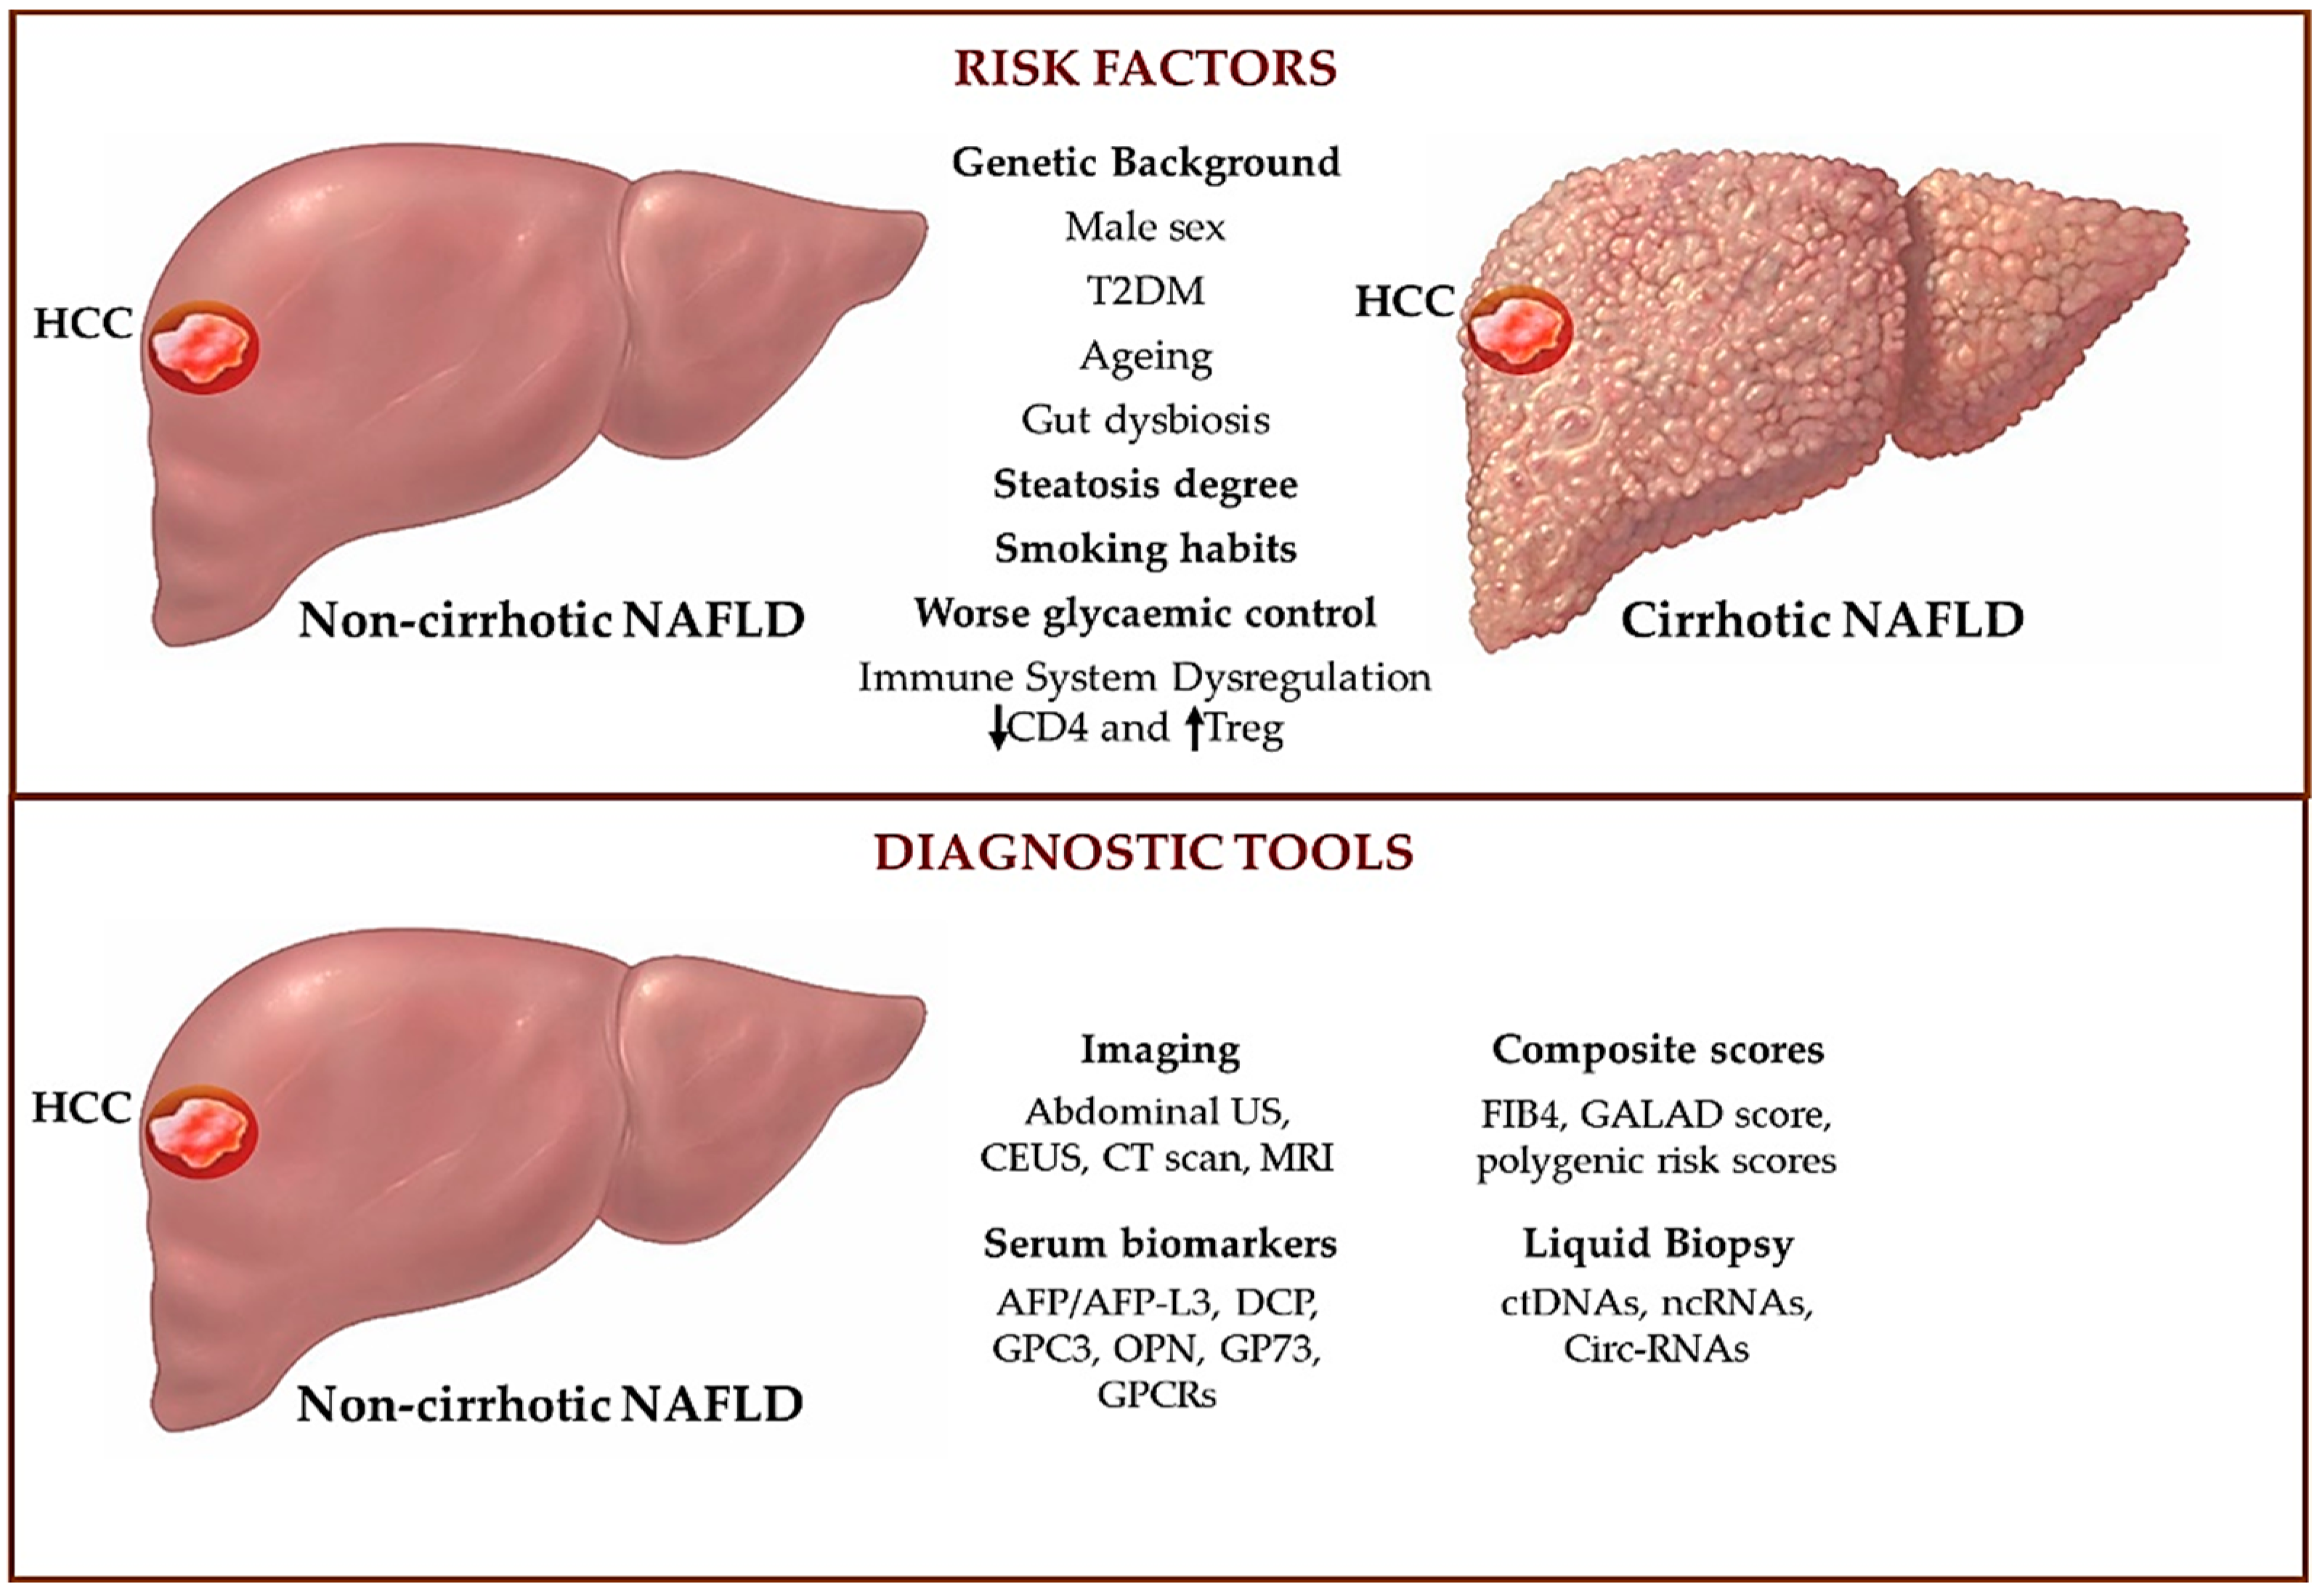 Biomedicines Free Full-Text An Overview of Hepatocellular Carcinoma Surveillance Focusing on Non-Cirrhotic NAFLD Patients A Challenge for Physicians